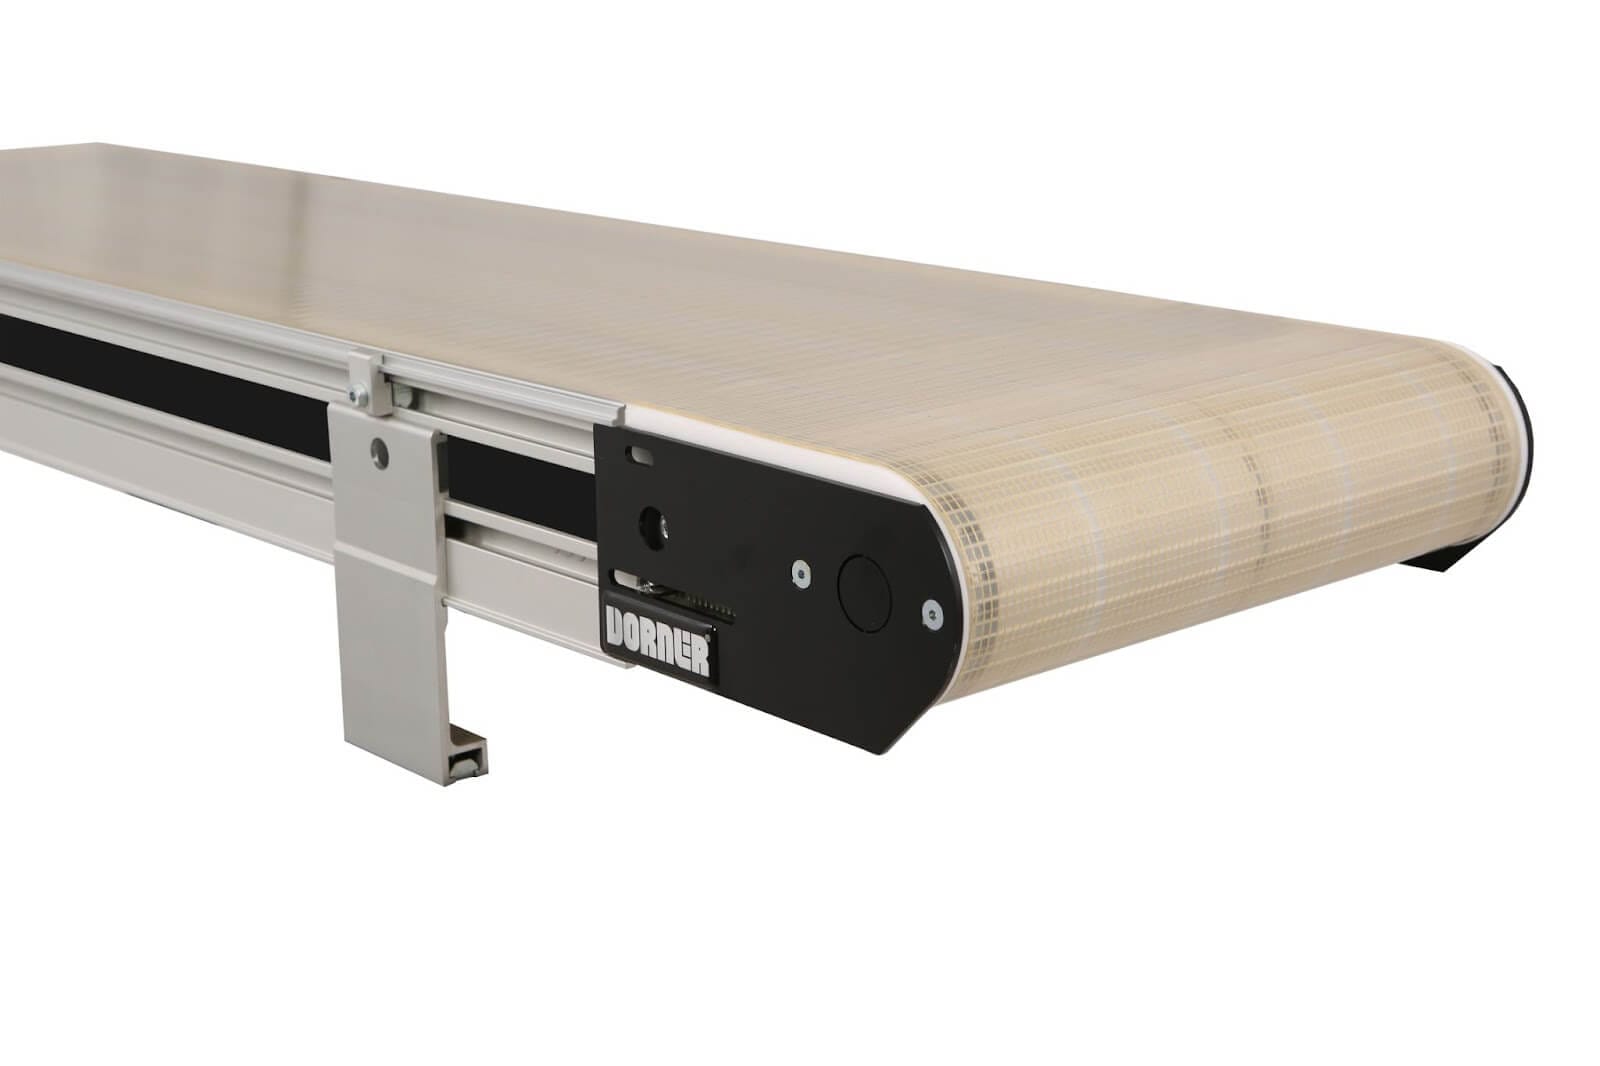 Image of a Dorner 3200 Precision Move conveyor, which can regularly achieve speeds of 517 ft/min and is built for bursts of even higher speeds.